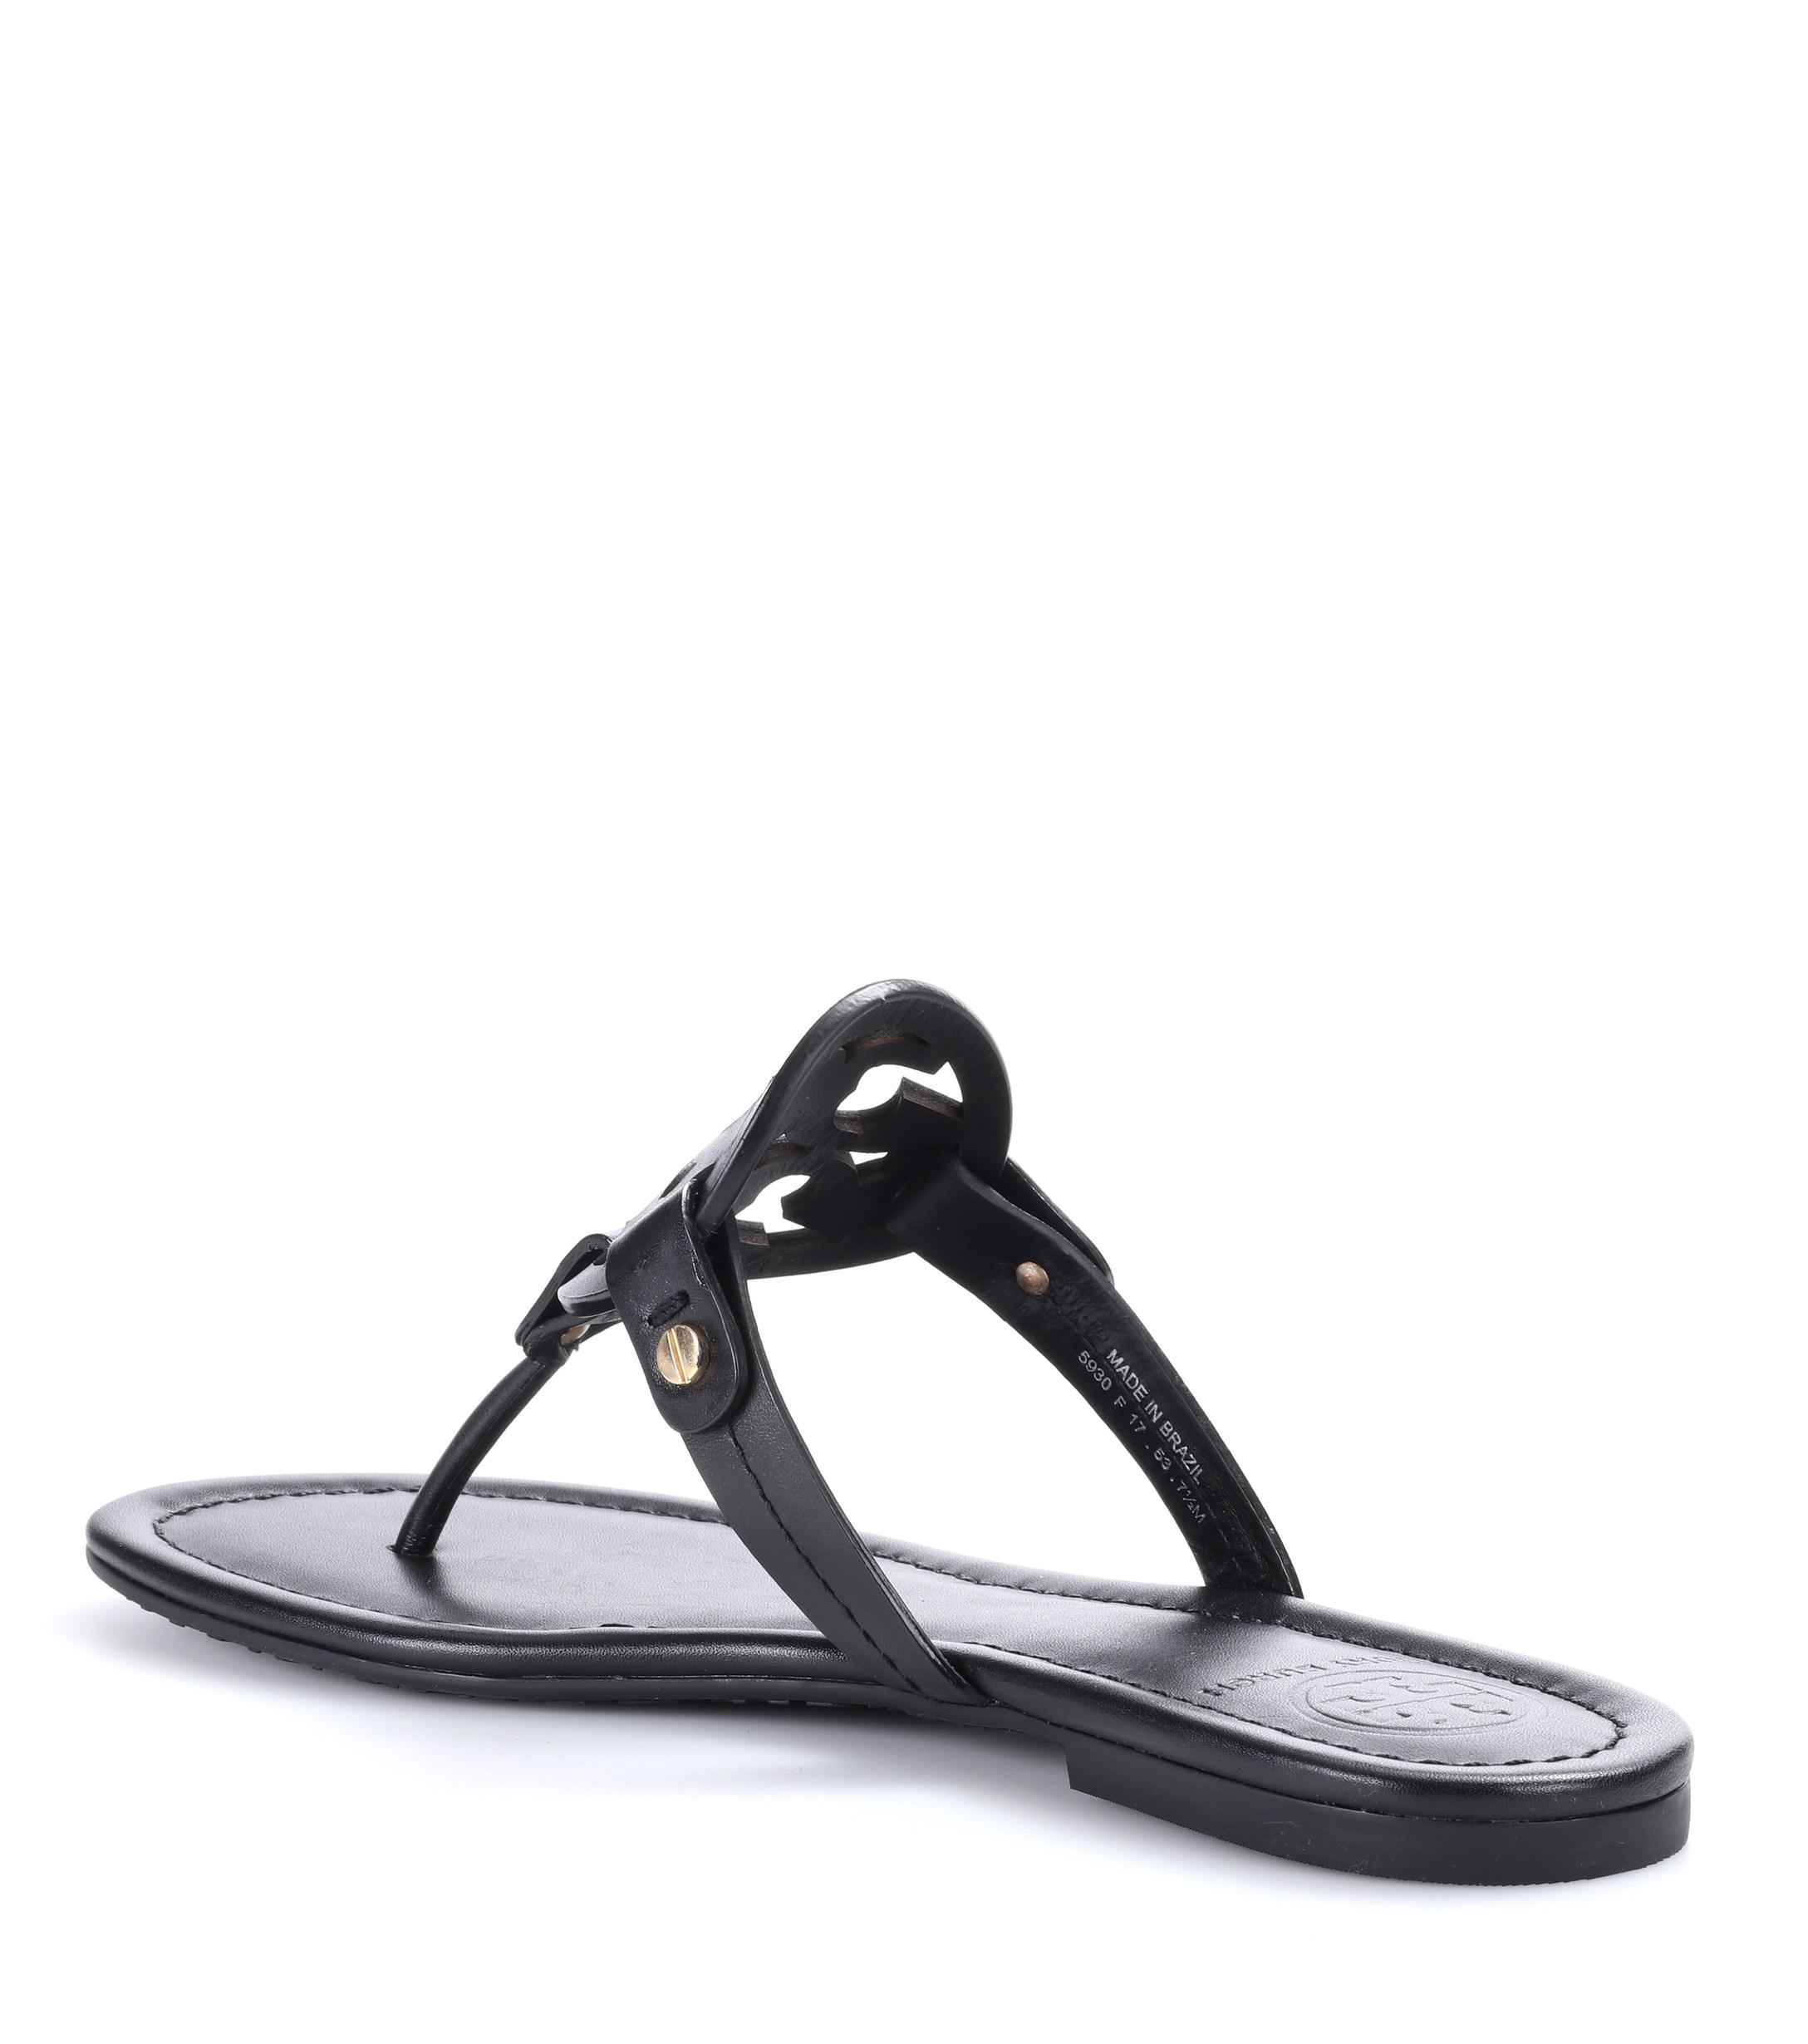 Tory Burch Miller Leather Sandals in Black - Lyst